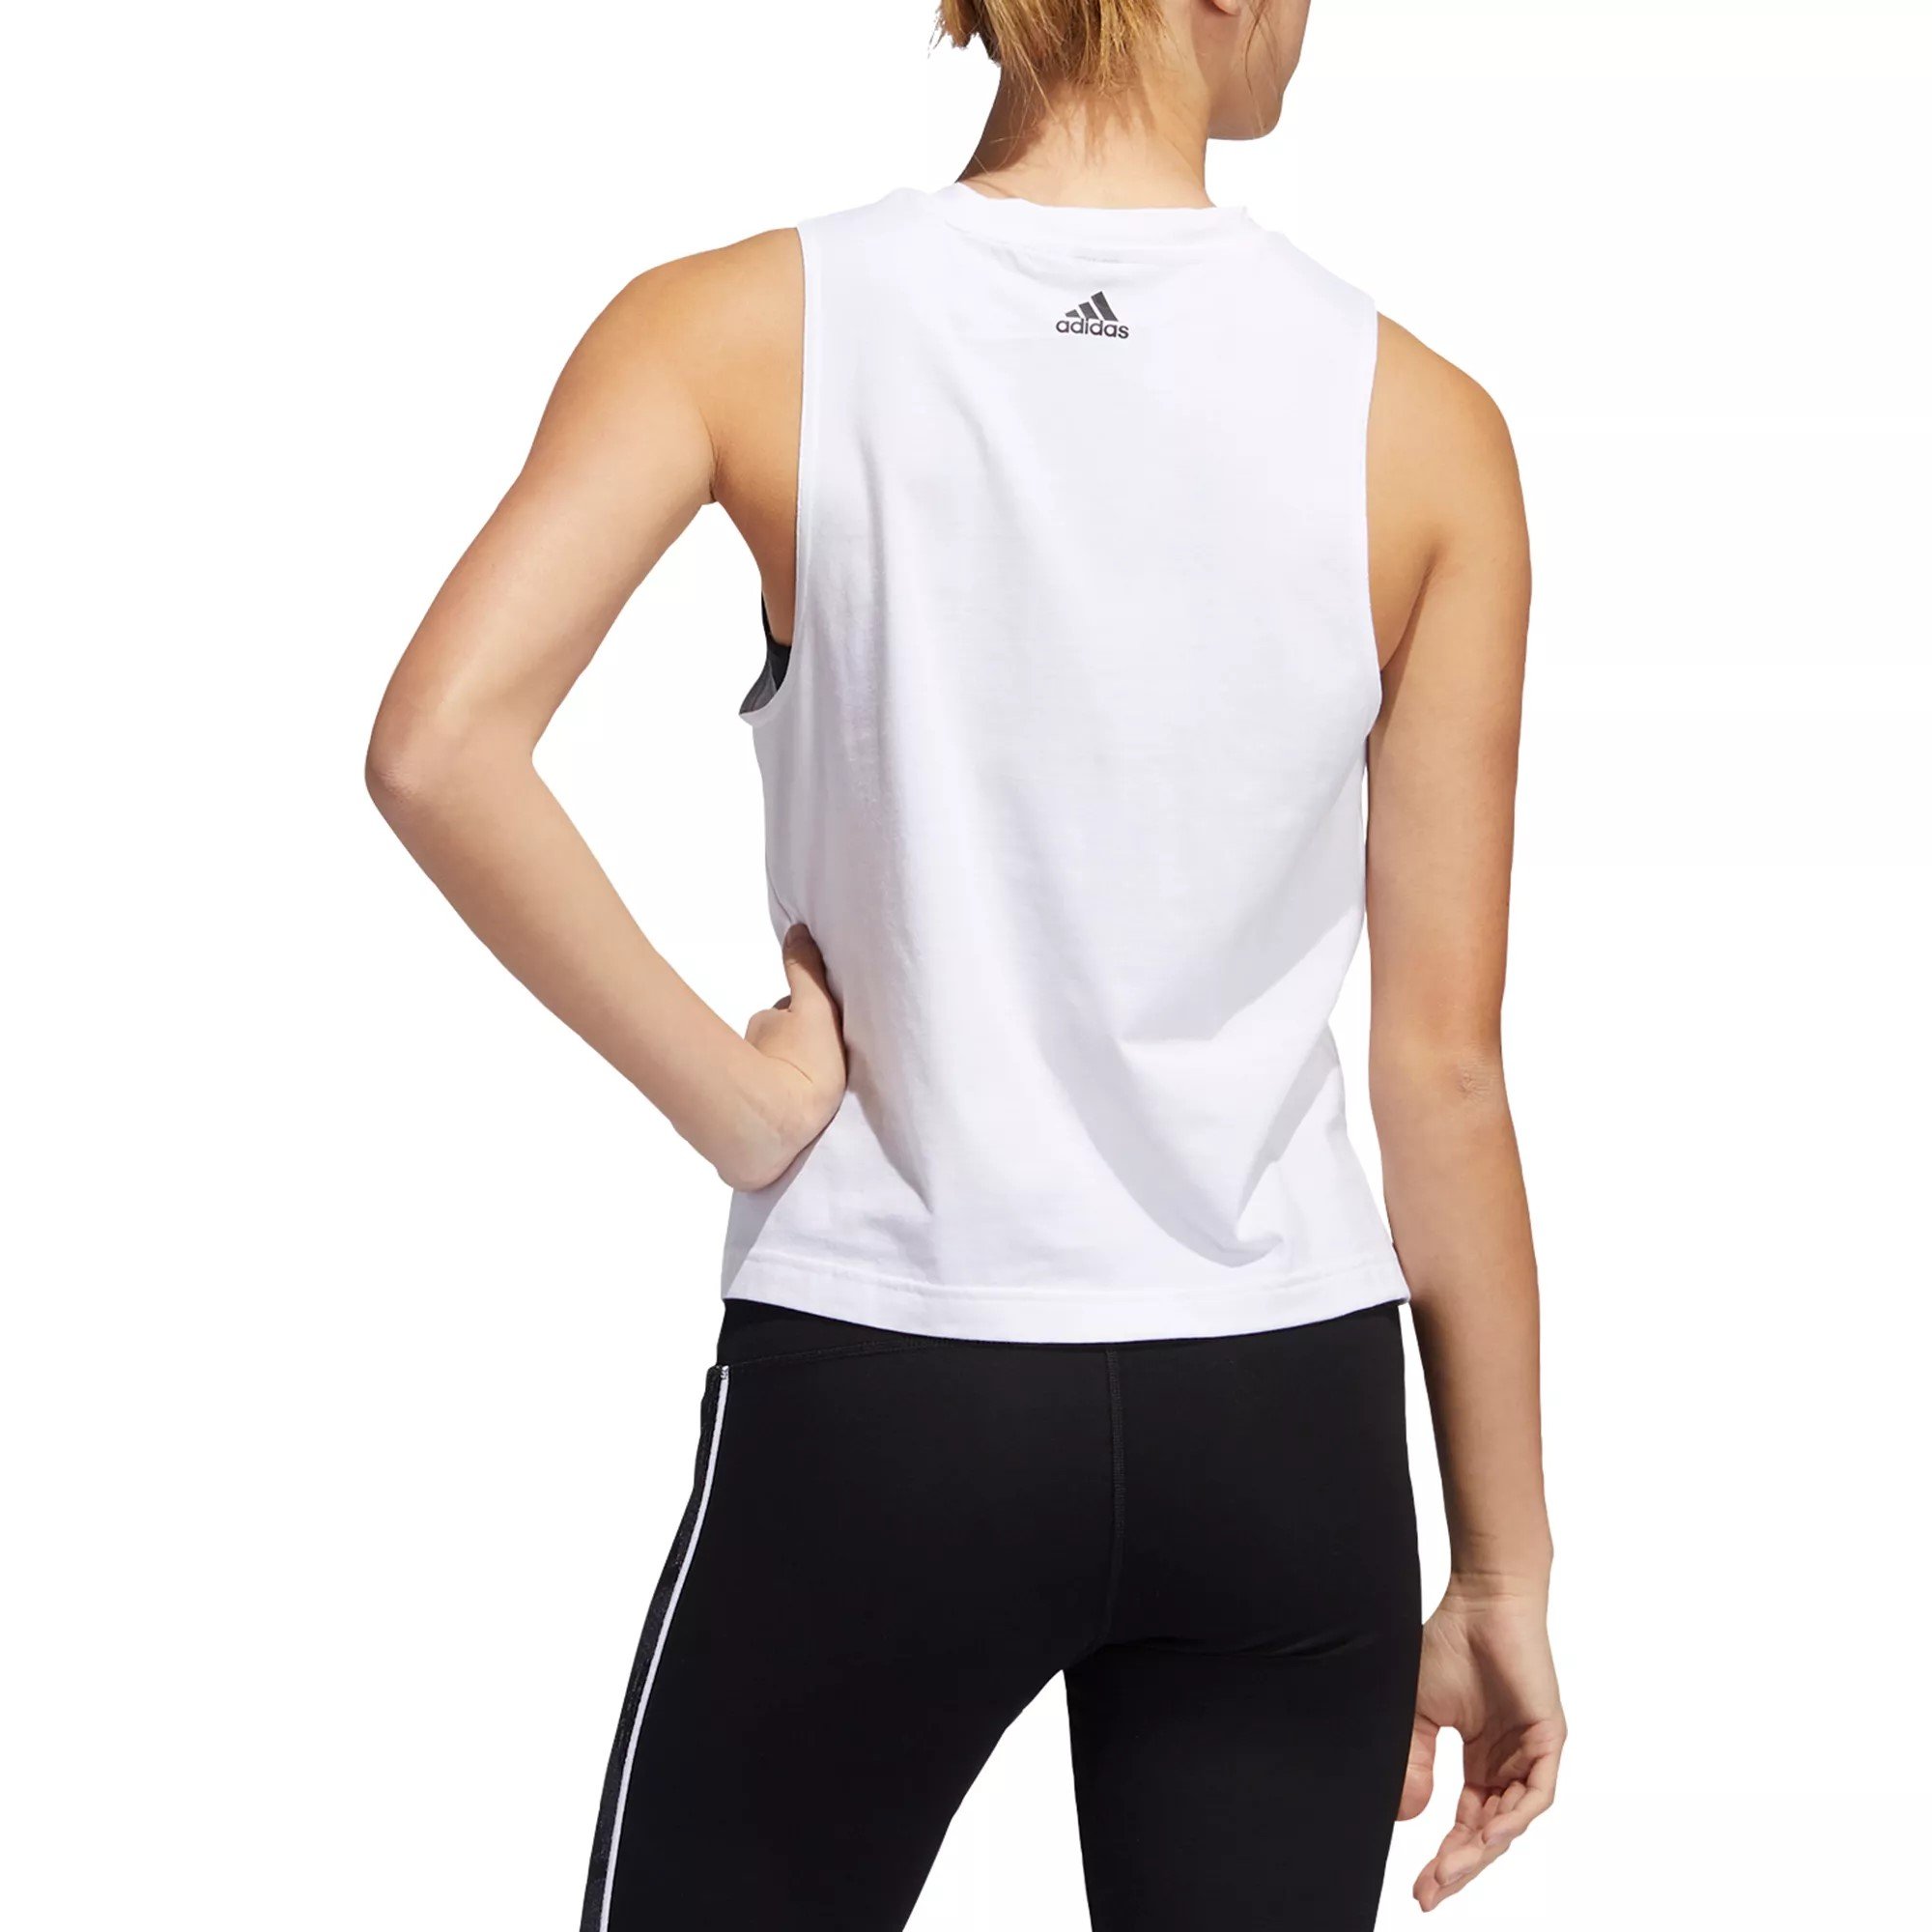 Adidas Knotted Tank Top, Color Options Walmart.com